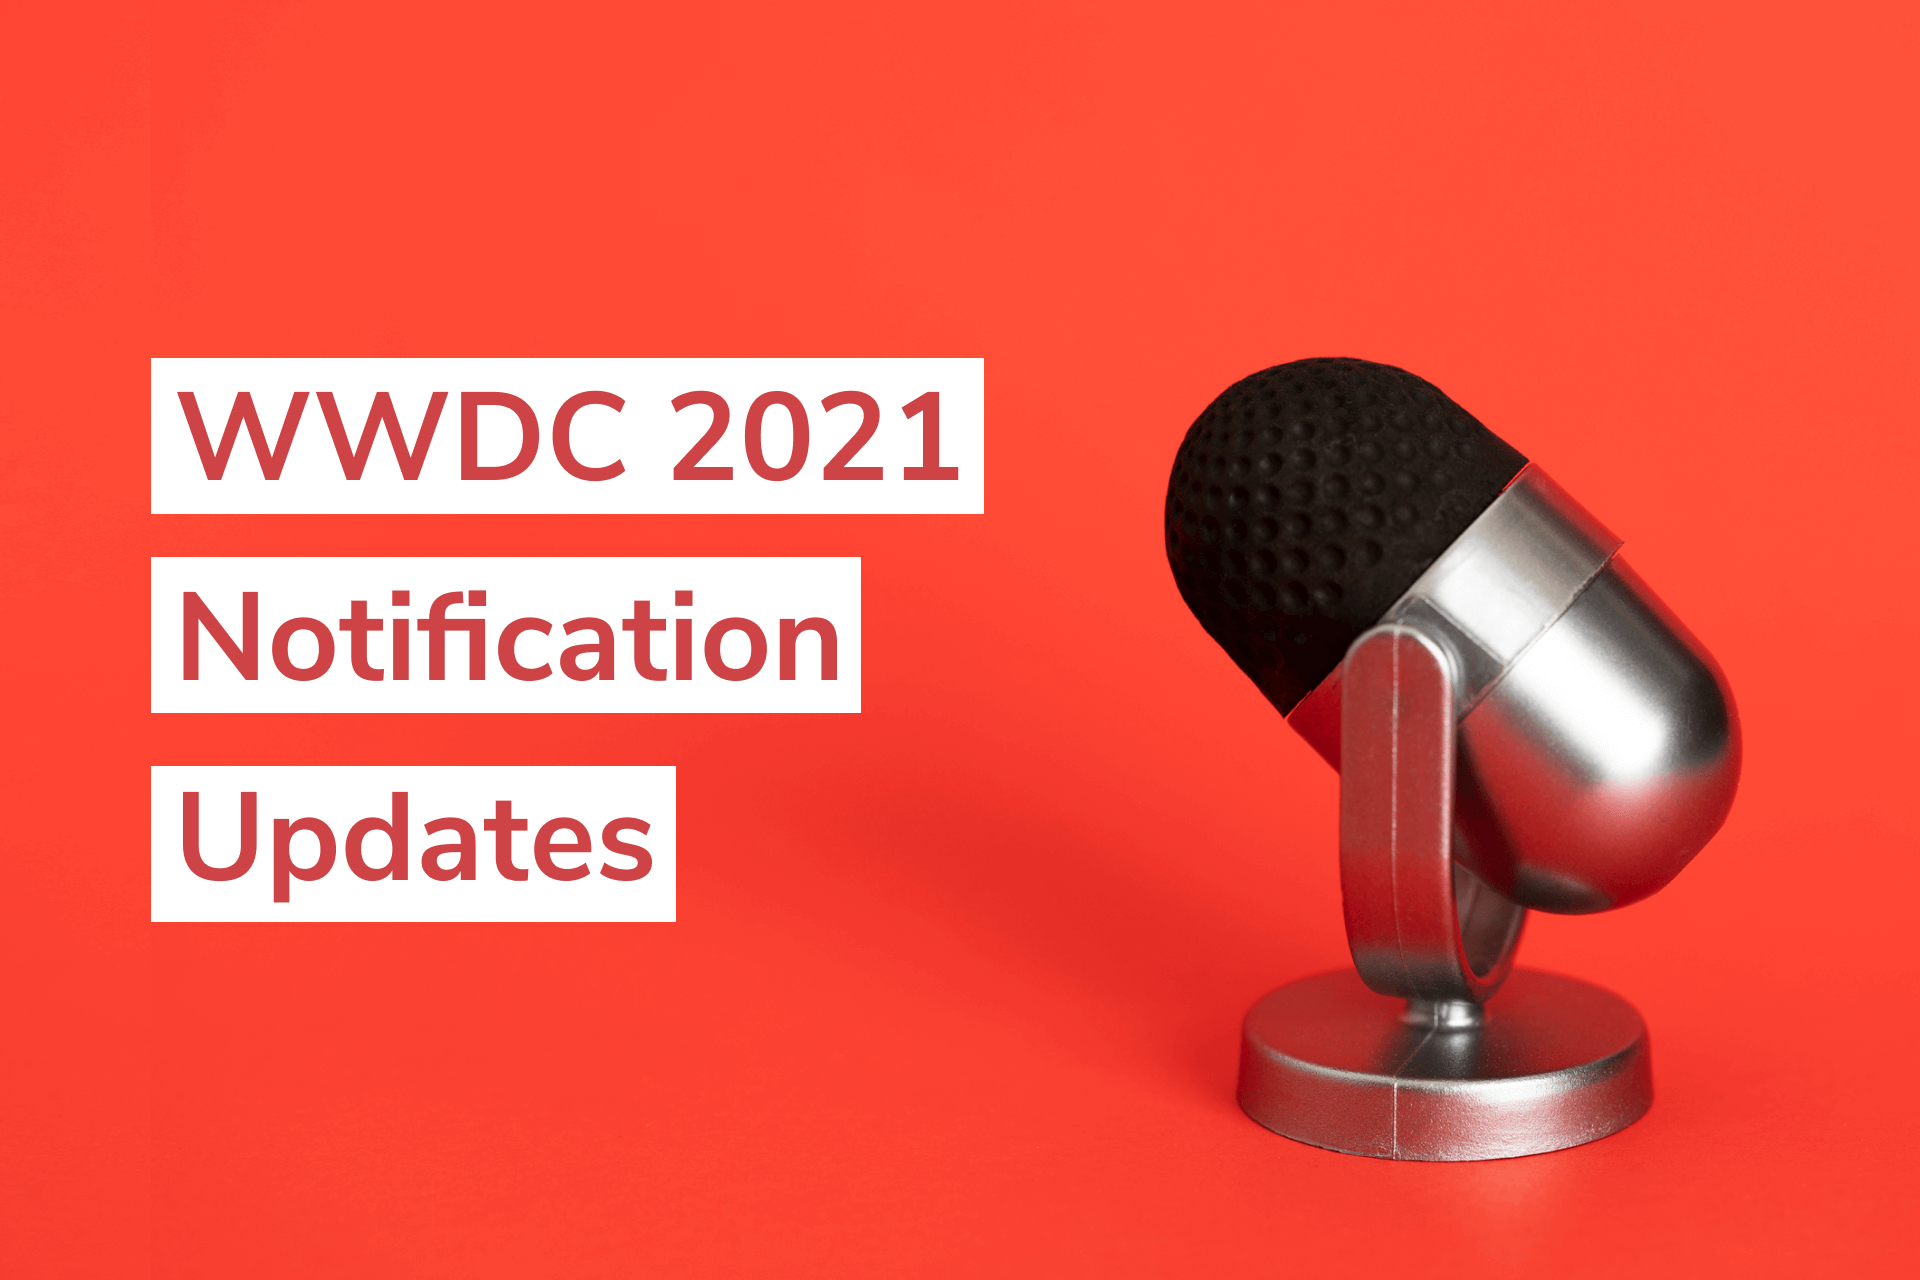 Apple’s 2021 Worldwide Developer Conference (WWDC) conference is about to conclude after a week of keynote speeches and in-depth sessions. At this y